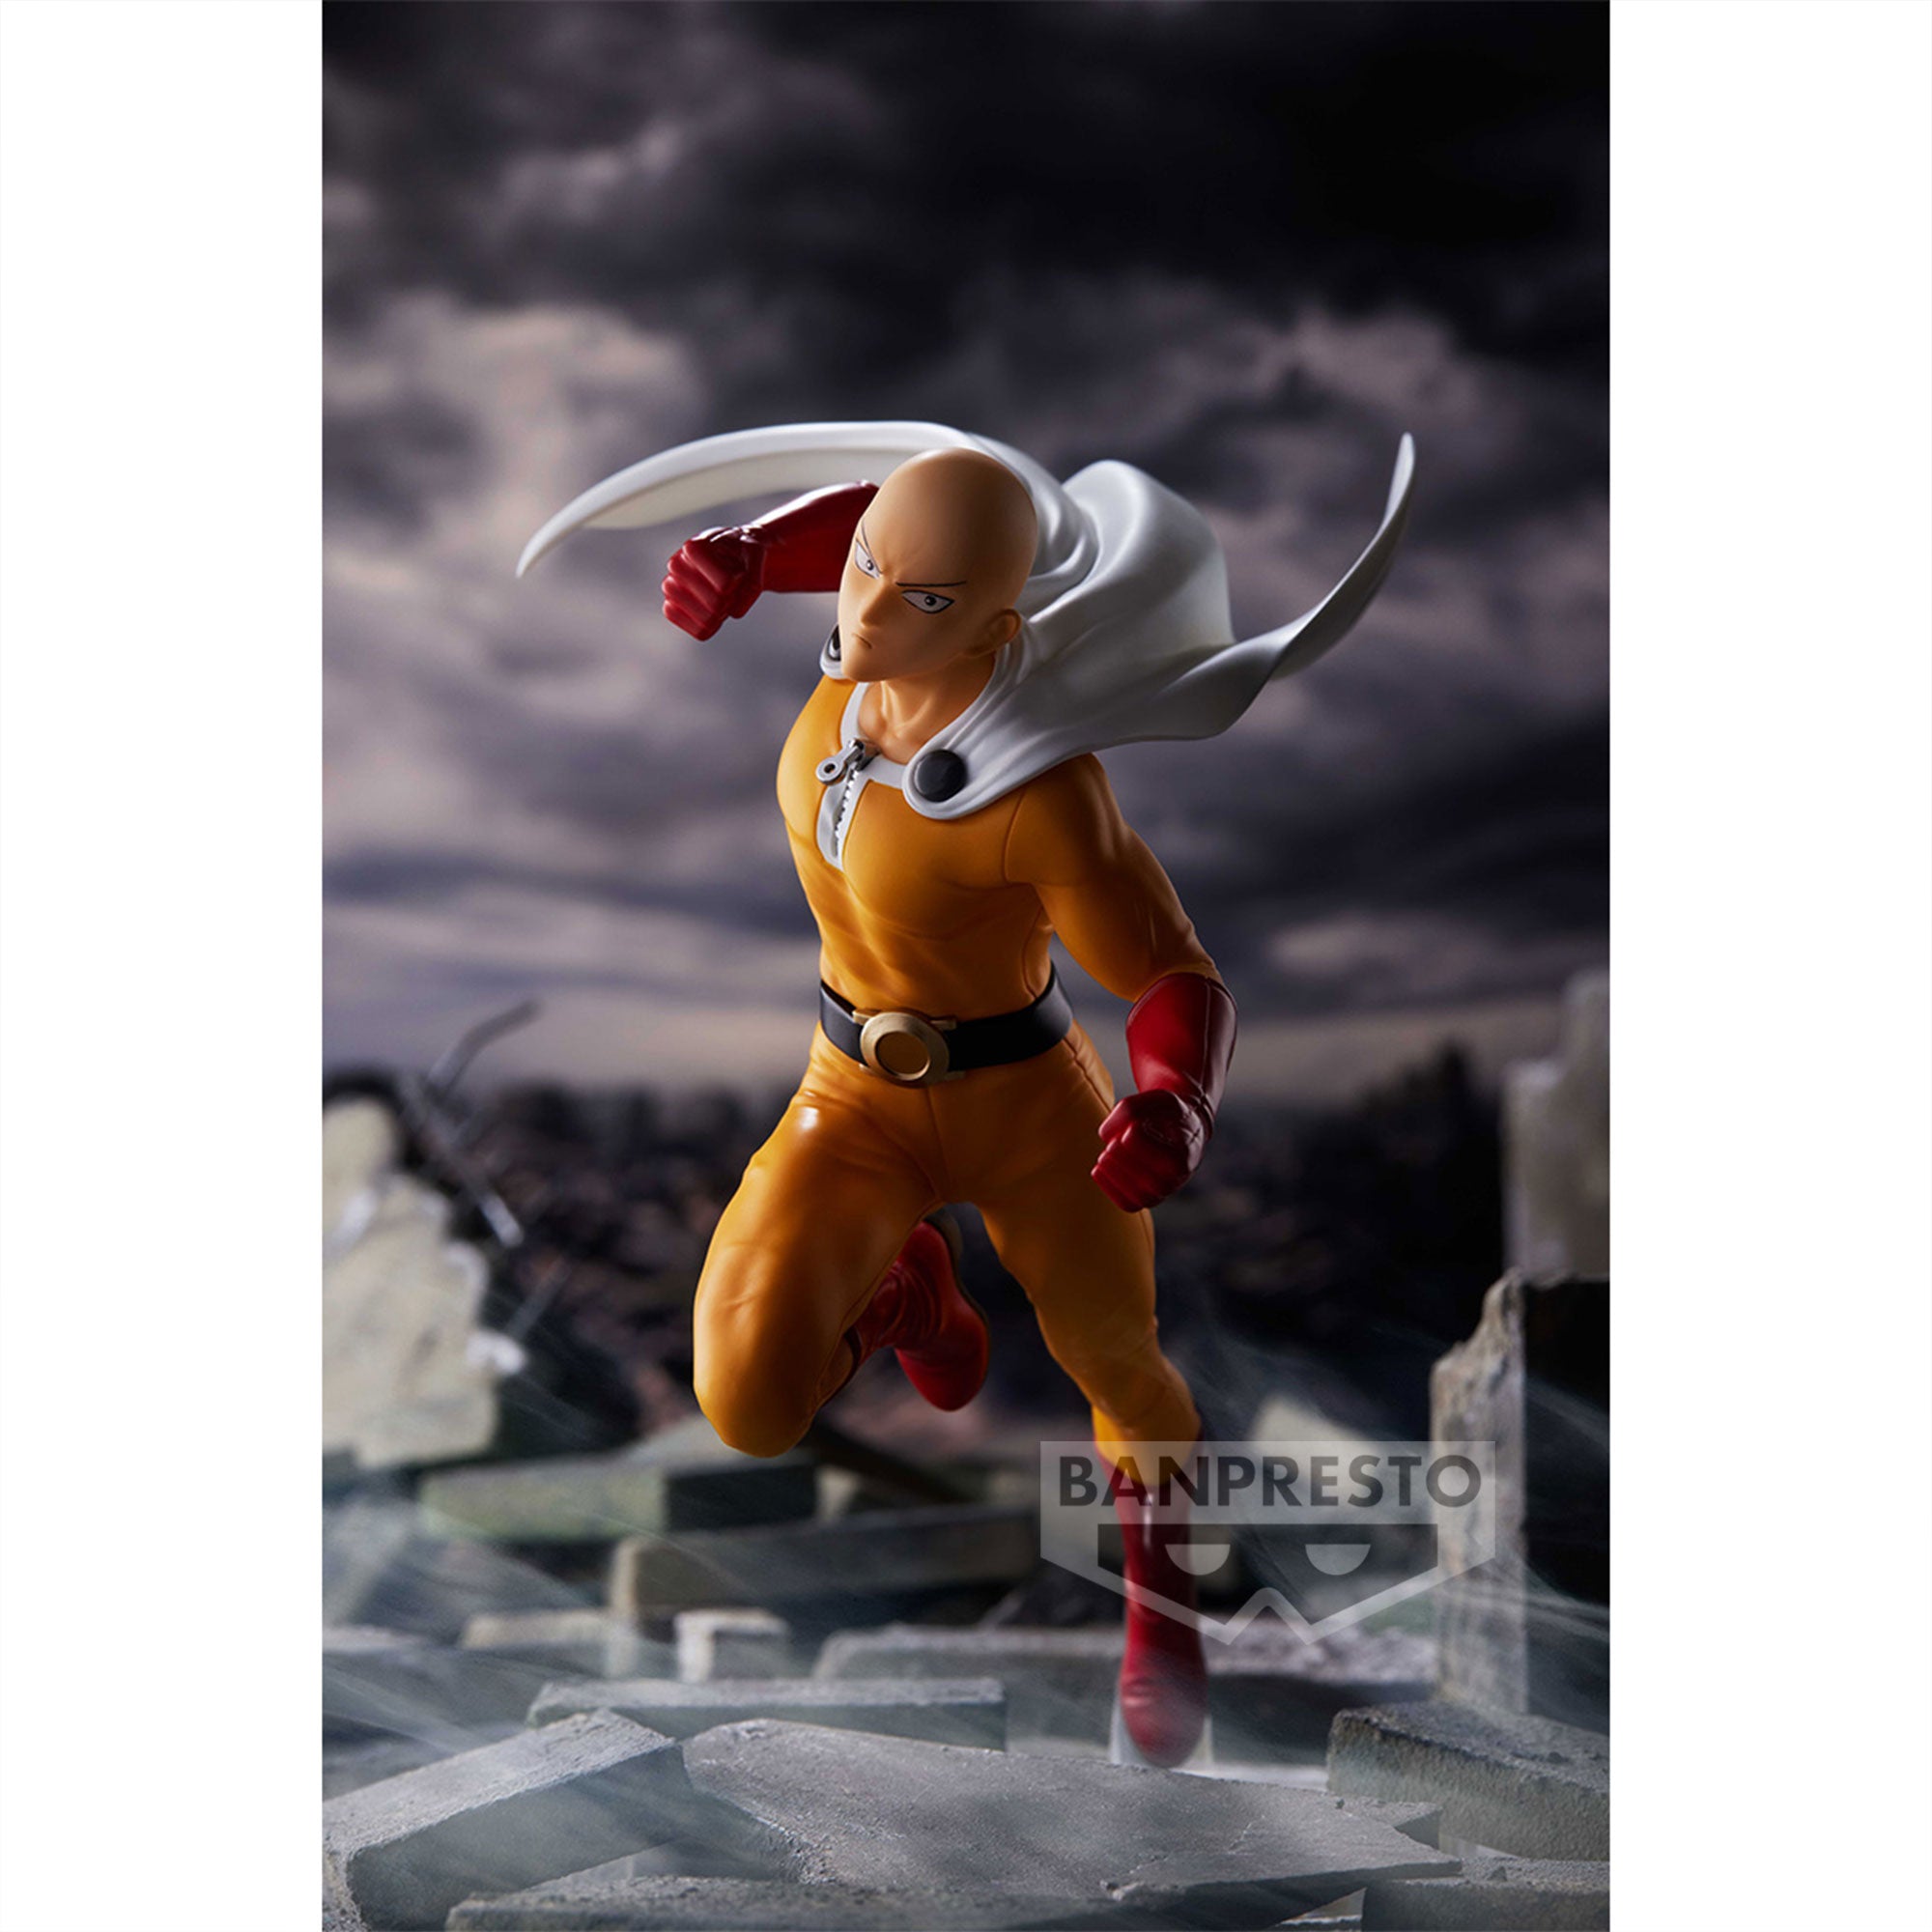 McFarlane Toys - Saitama is in stores! Find him at the